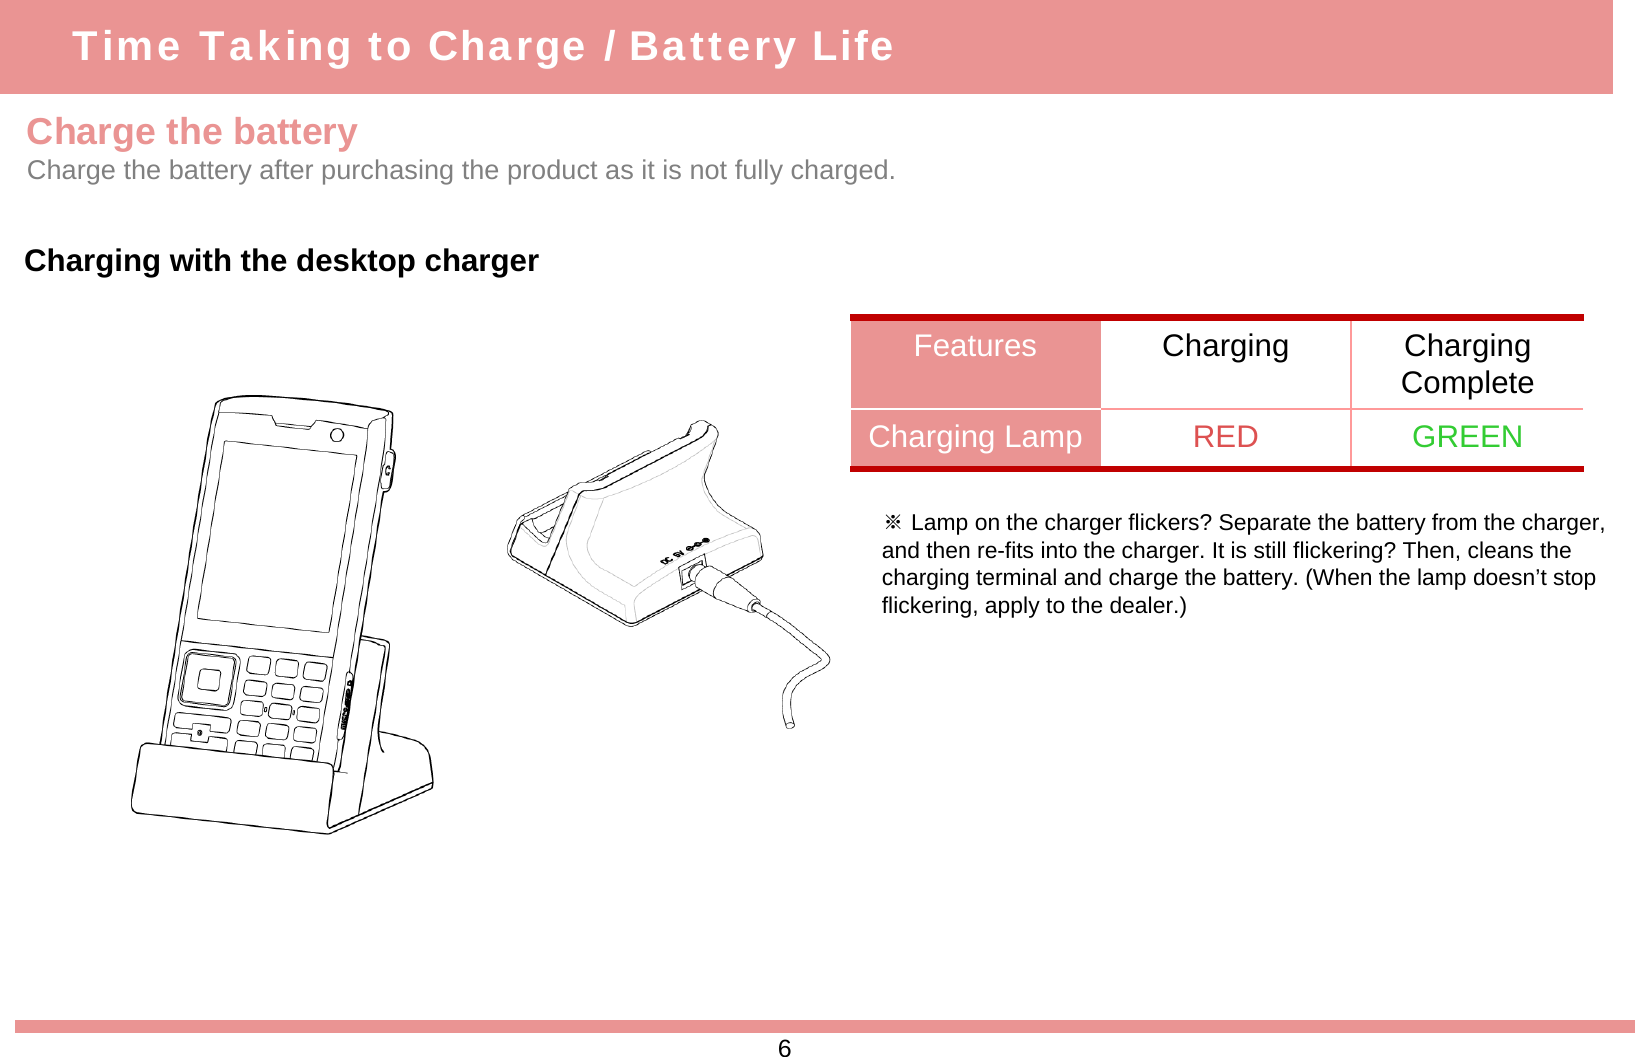 Charge the batteryCharge the battery after purchasing the product as it is not fully charged.Charging with the desktop charger※Lamp on the charger flickers? Separate the battery from the charger, and then re-fits into the charger. It is still flickering? Then, cleans the charging terminal and charge the battery. (When the lamp doesn’t stop flickering, apply to the dealer.)Features Charging Charging CompleteCharging Lamp RED GREENTime Taking to Charge / Battery Life6